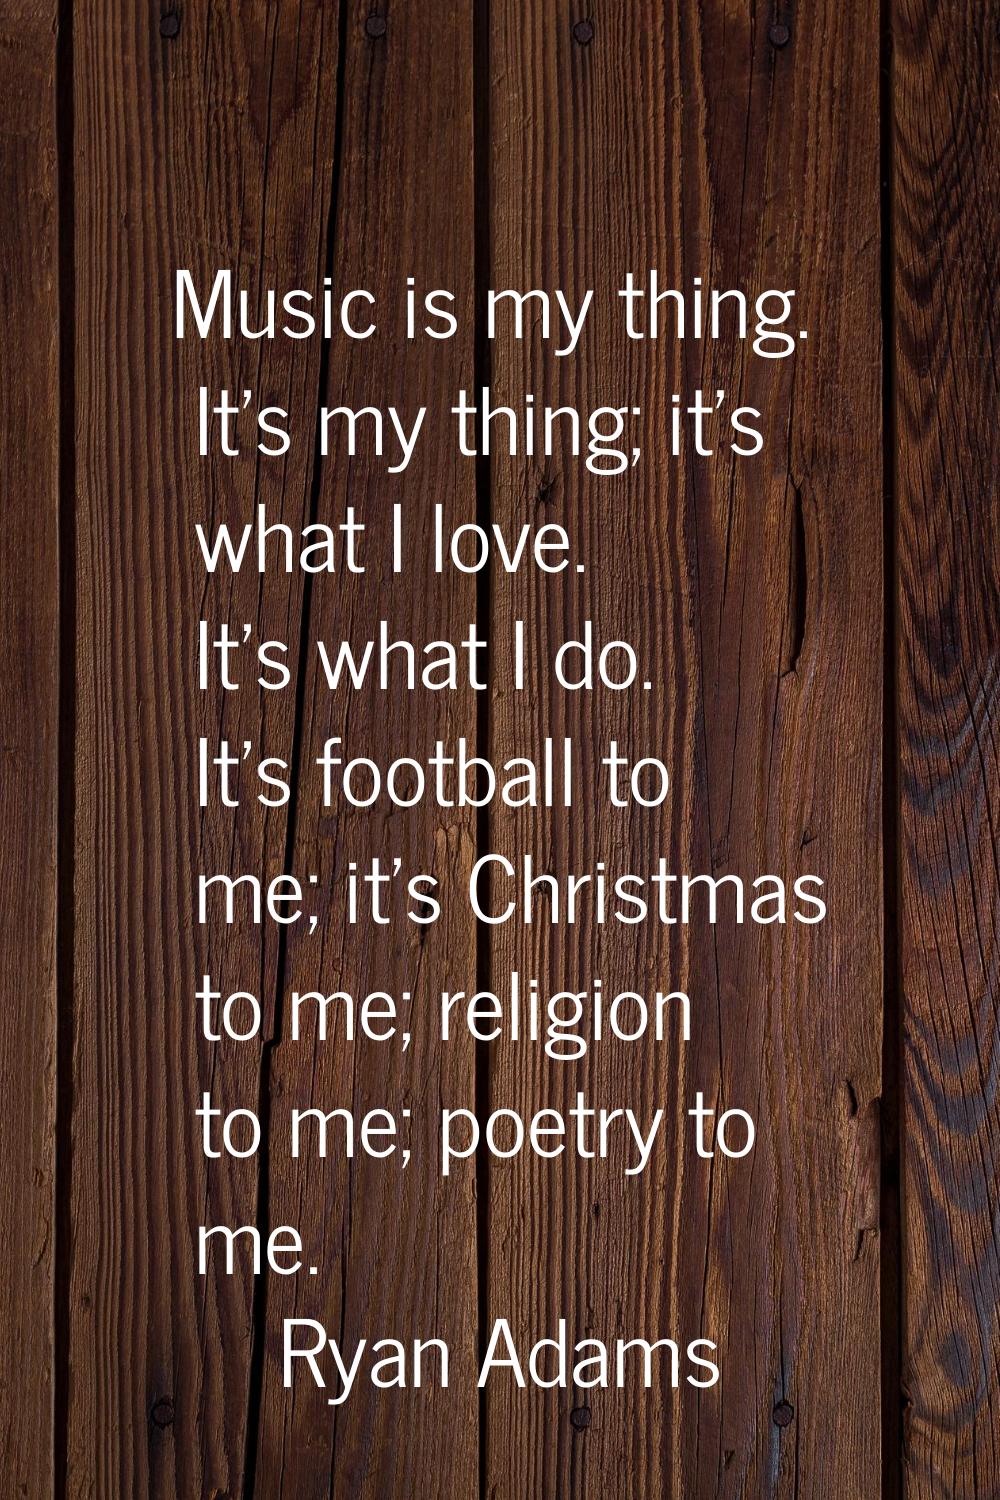 Music is my thing. It's my thing; it's what I love. It's what I do. It's football to me; it's Chris